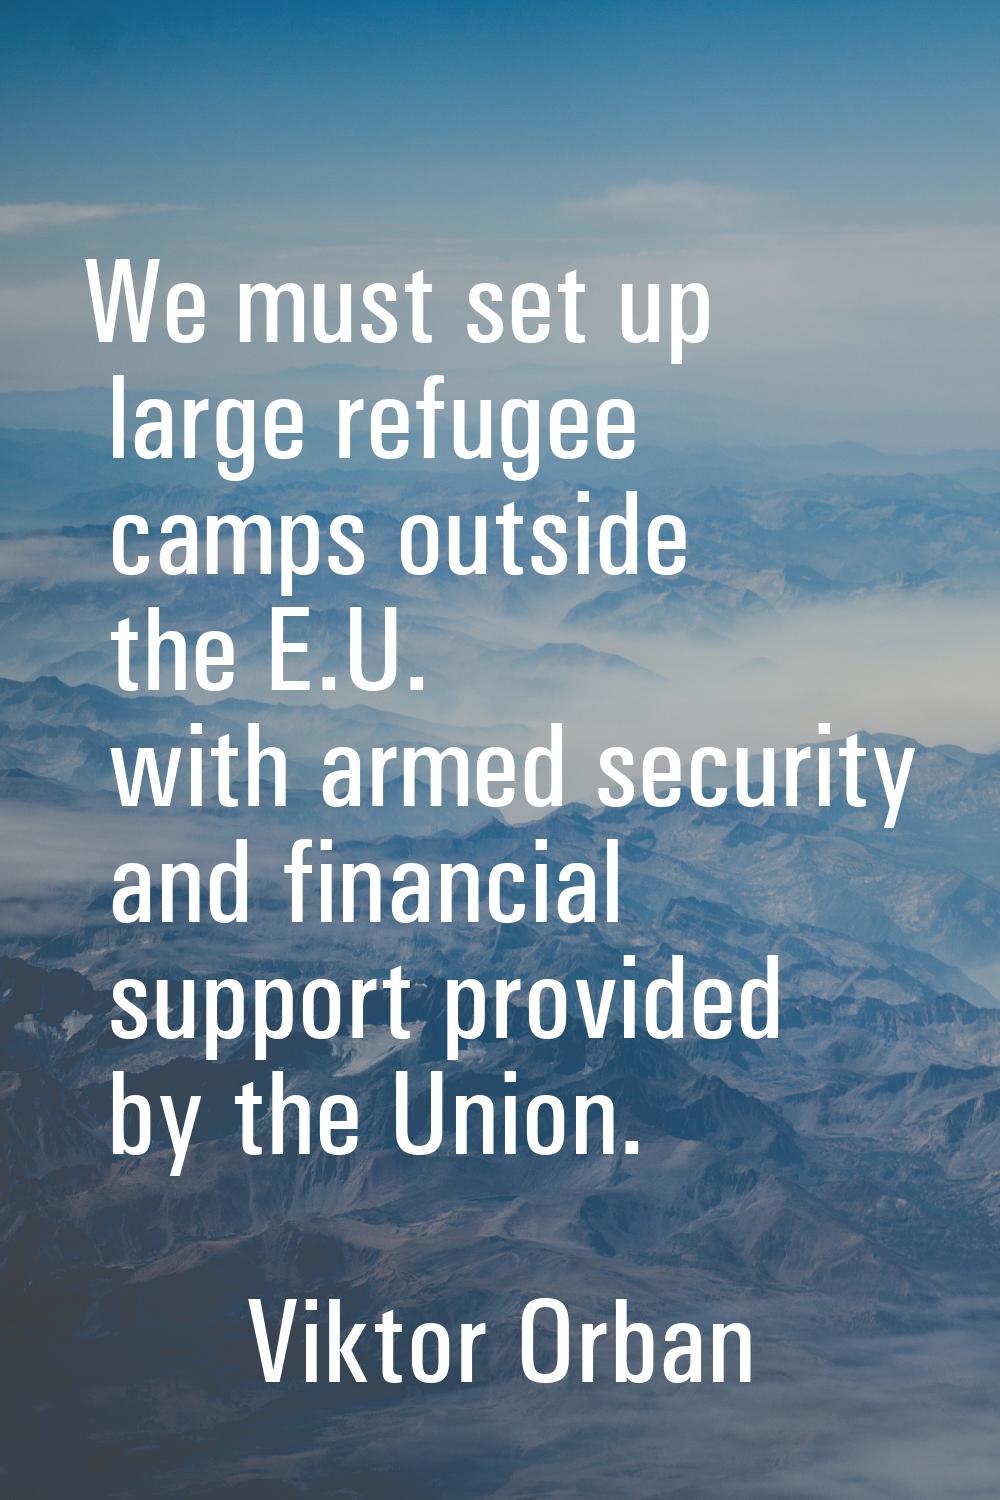 We must set up large refugee camps outside the E.U. with armed security and financial support provi